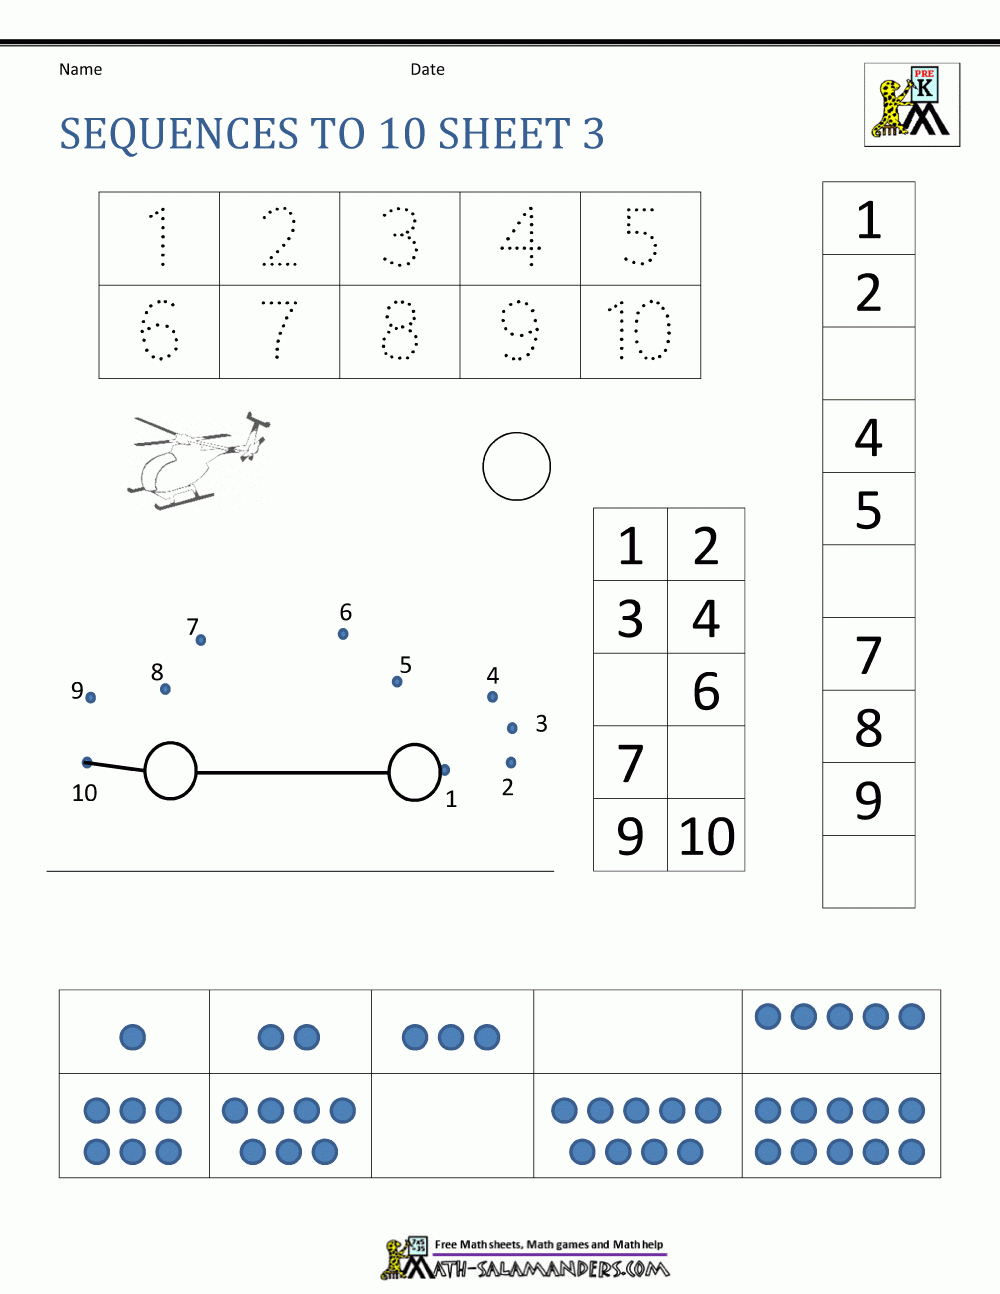 Preschool Number Worksheets - Sequencing To 10 - Printable Number Puzzles 1-10